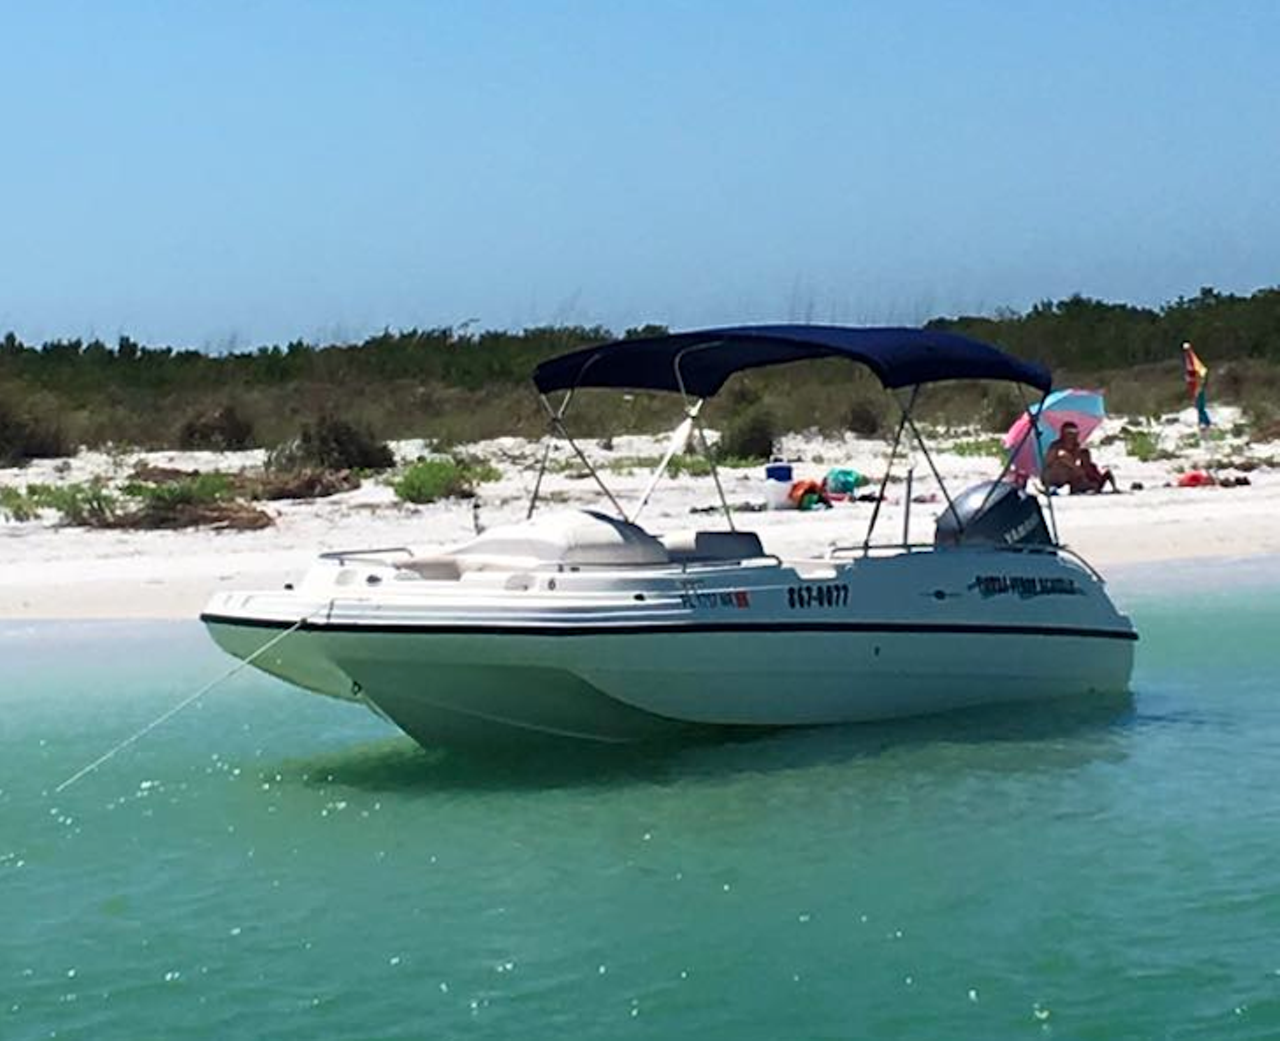 Tierra Verde Boat Rentals
100 Pinellas Bayway S., St. Petersburg | 727-867-0077
There's plenty to do when cruising the waters around St. Petersburg: go birdwatching on Egmont Key, search for coral on Shell Island or take in a sunset with a view of Sunshine Skyway Bridge.
Rate: $300 for a 6 hour boat rental
Photo via Tierra Verde Boat Rentals/Facebook